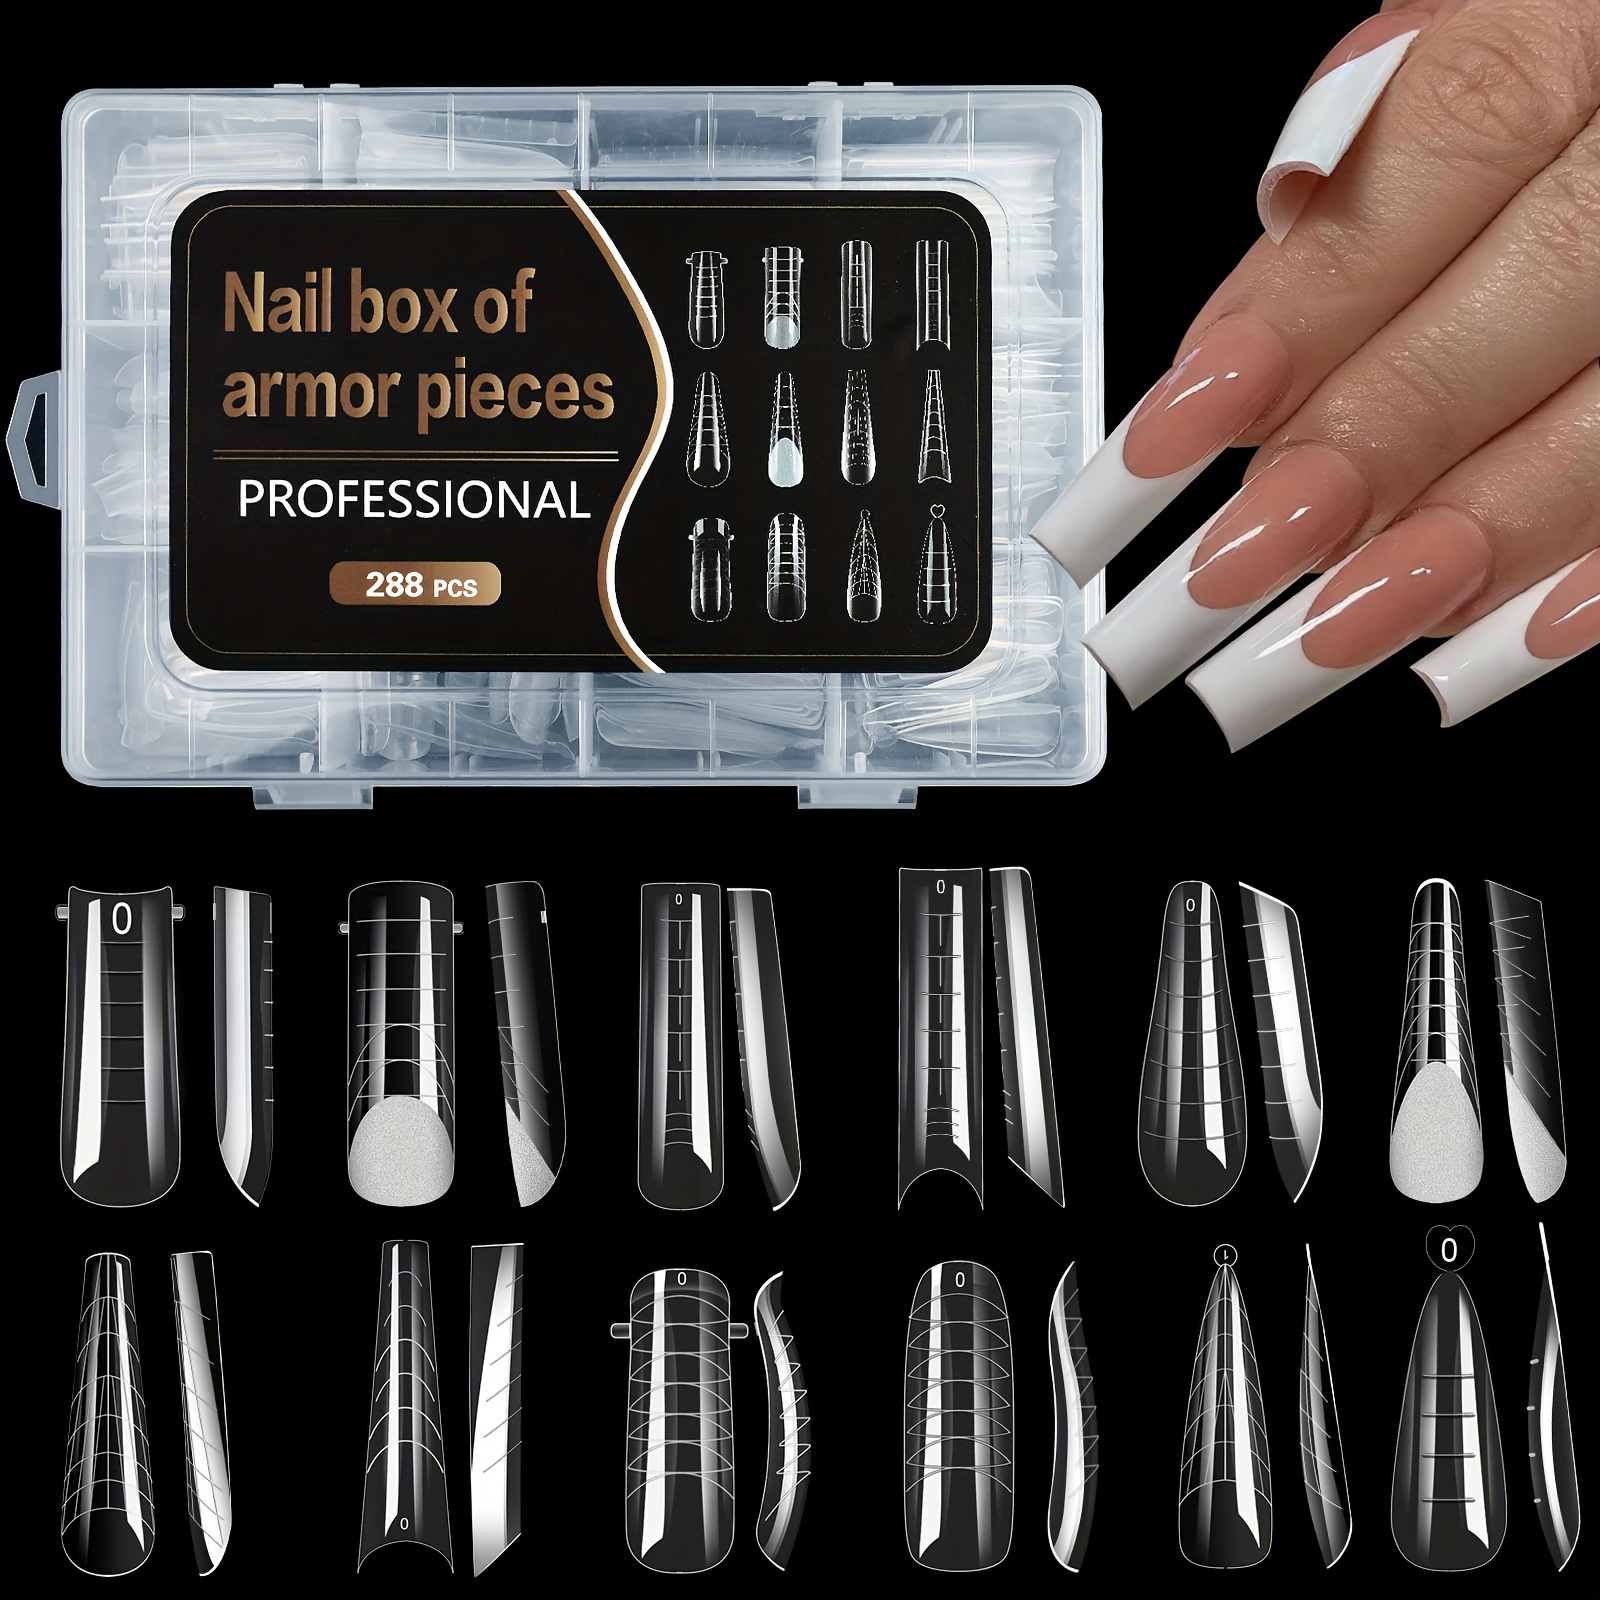 

Nail Dual Forms Set, Full Cover Acrylic Nail Tips Extension Molds For Builder Gel Manicure Design, Salon Quality Professional Kit